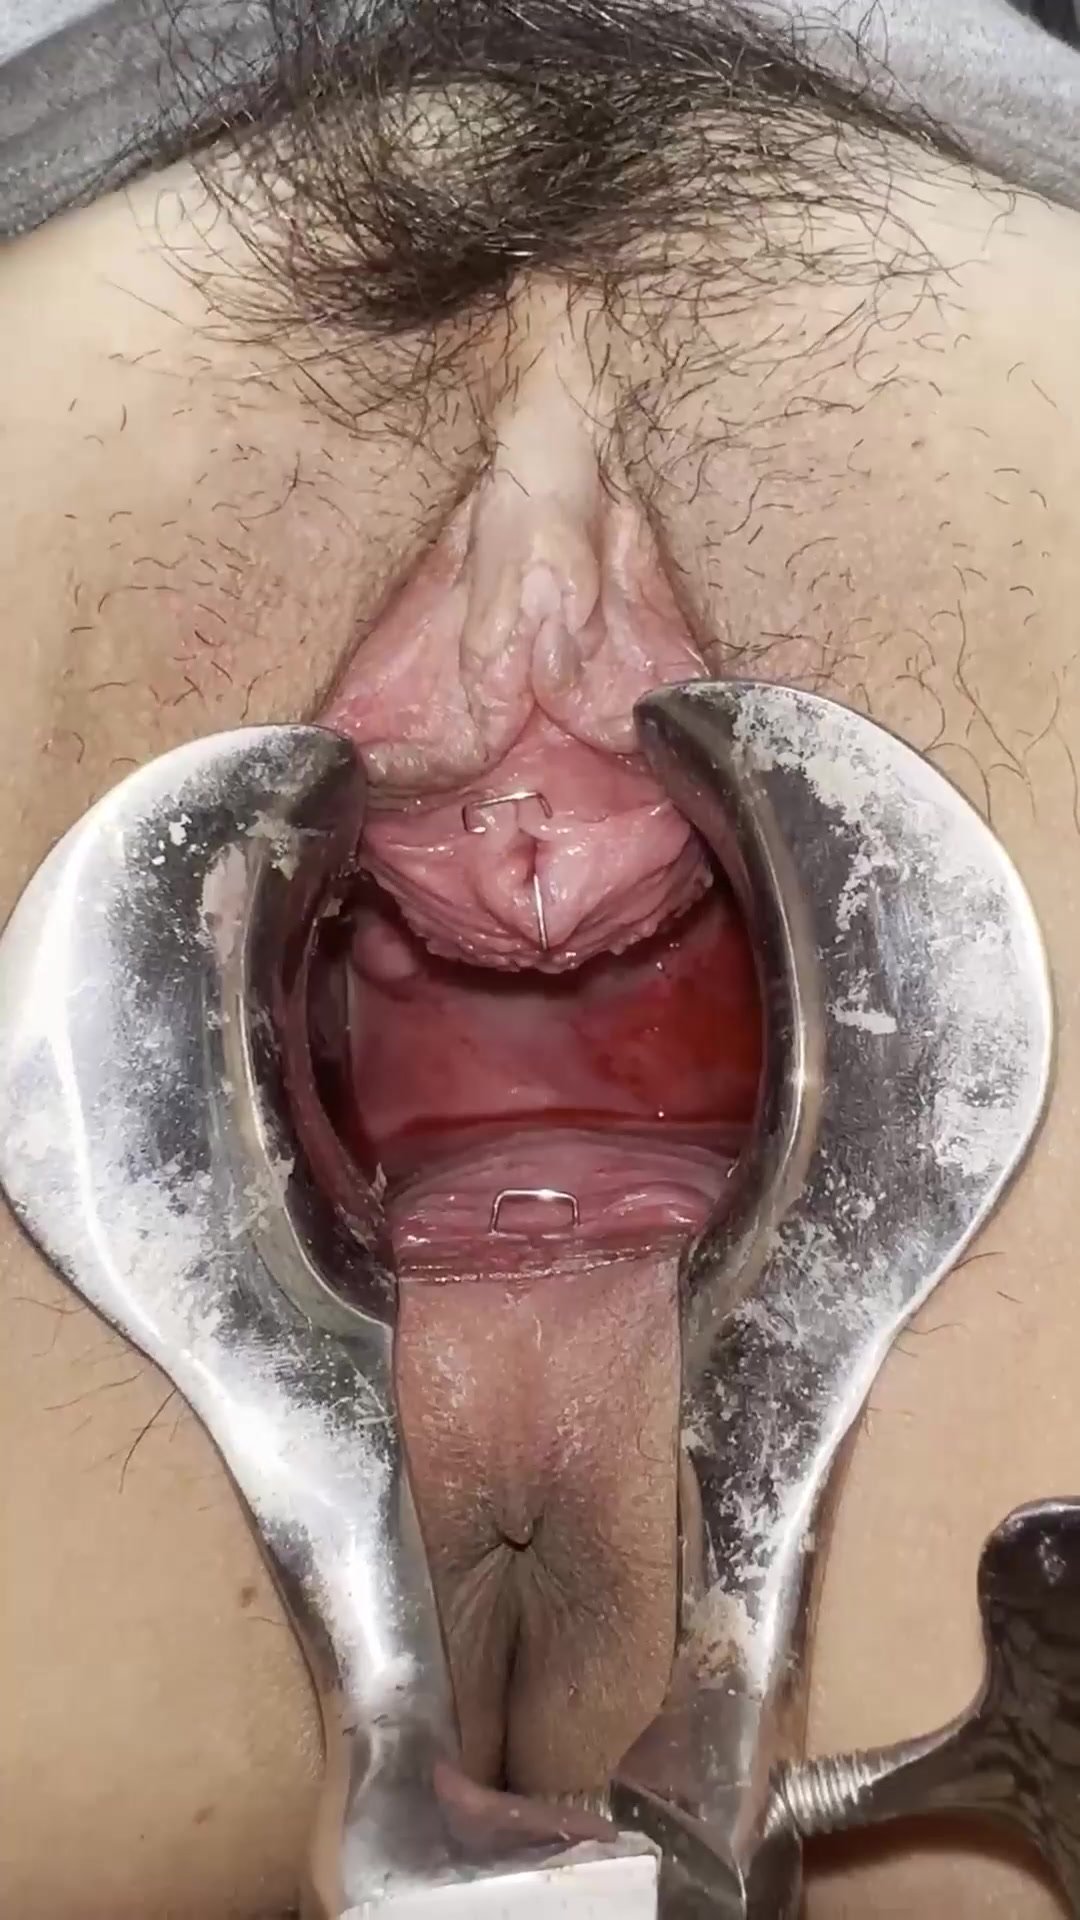 Urethra and pussy stapled